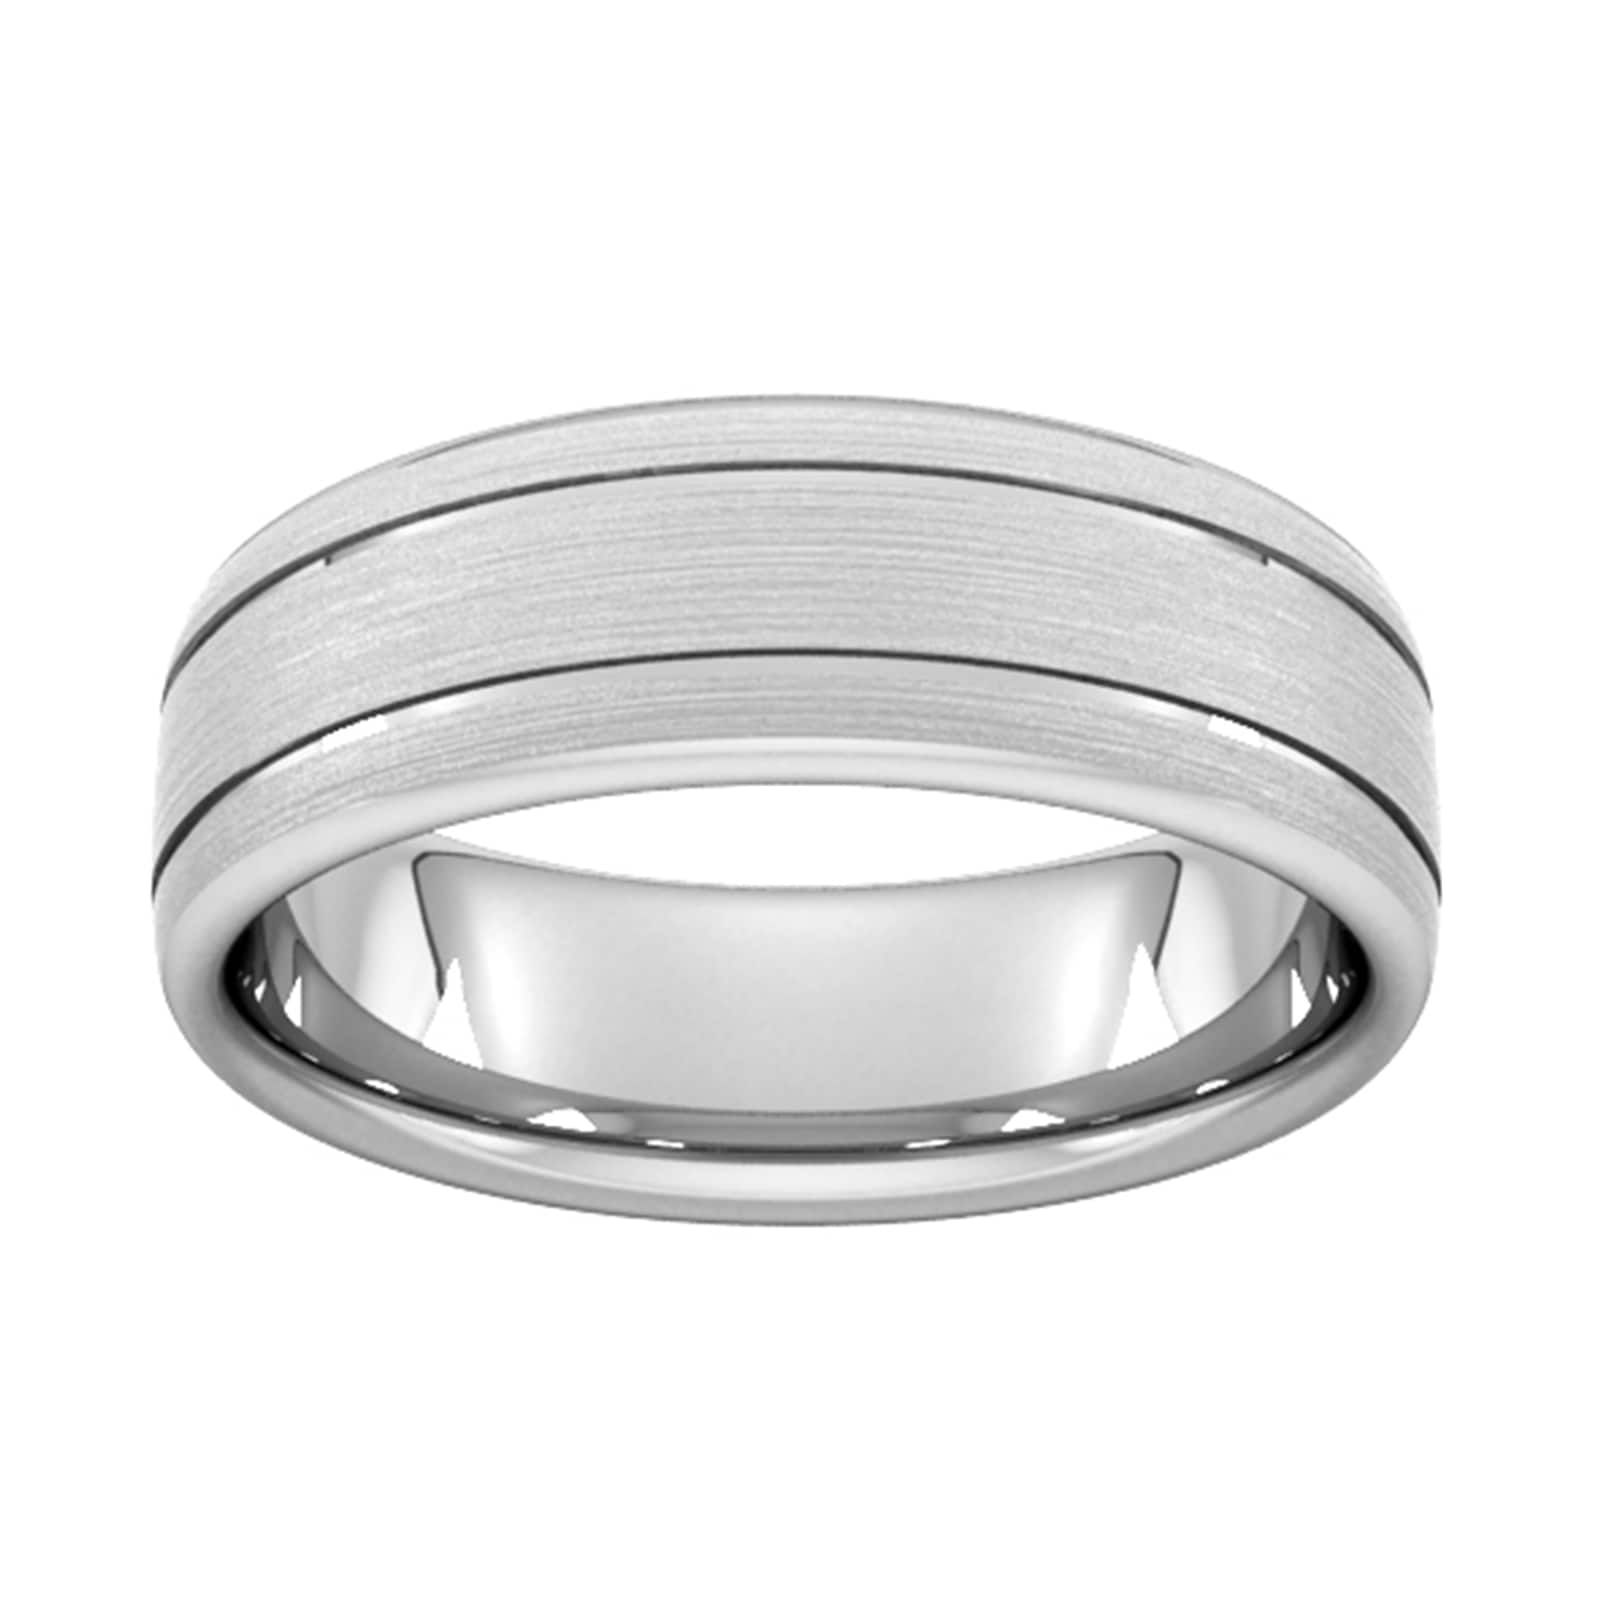 7mm Slight Court Heavy Matt Finish With Double Grooves Wedding Ring In Platinum - Ring Size G